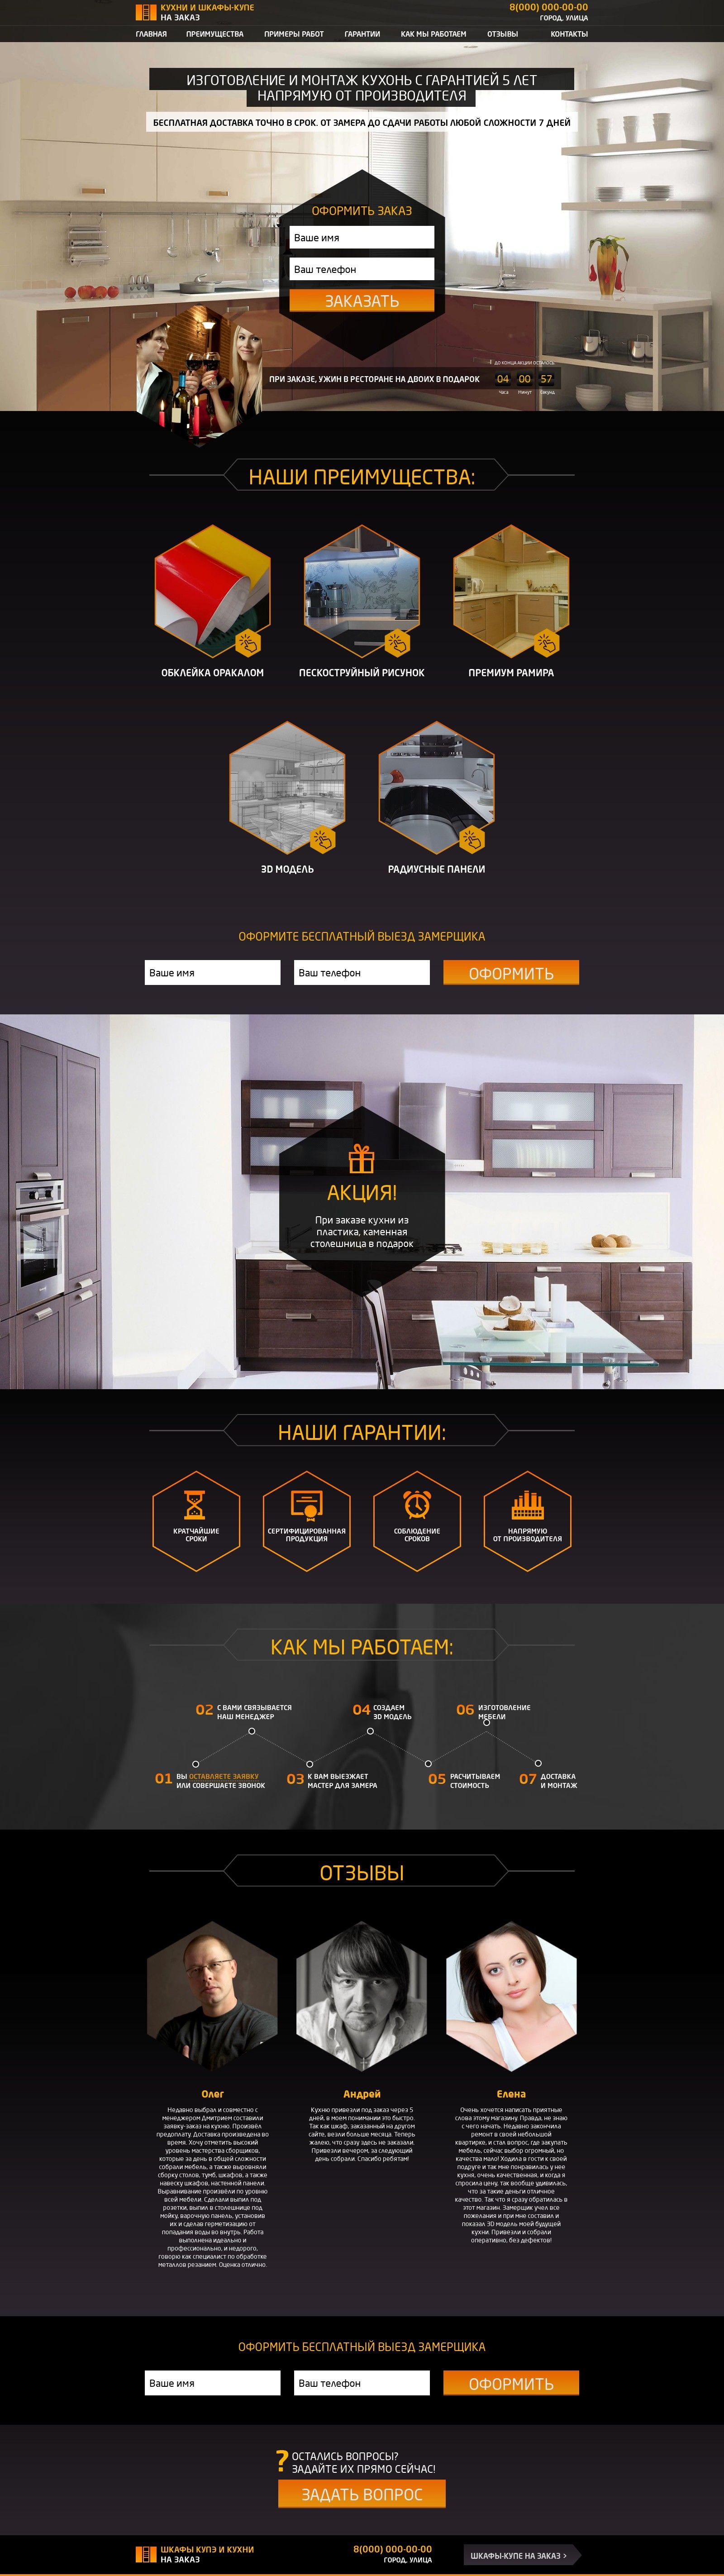 Landing page - Manufacturing and installation of kitchens and cabinets